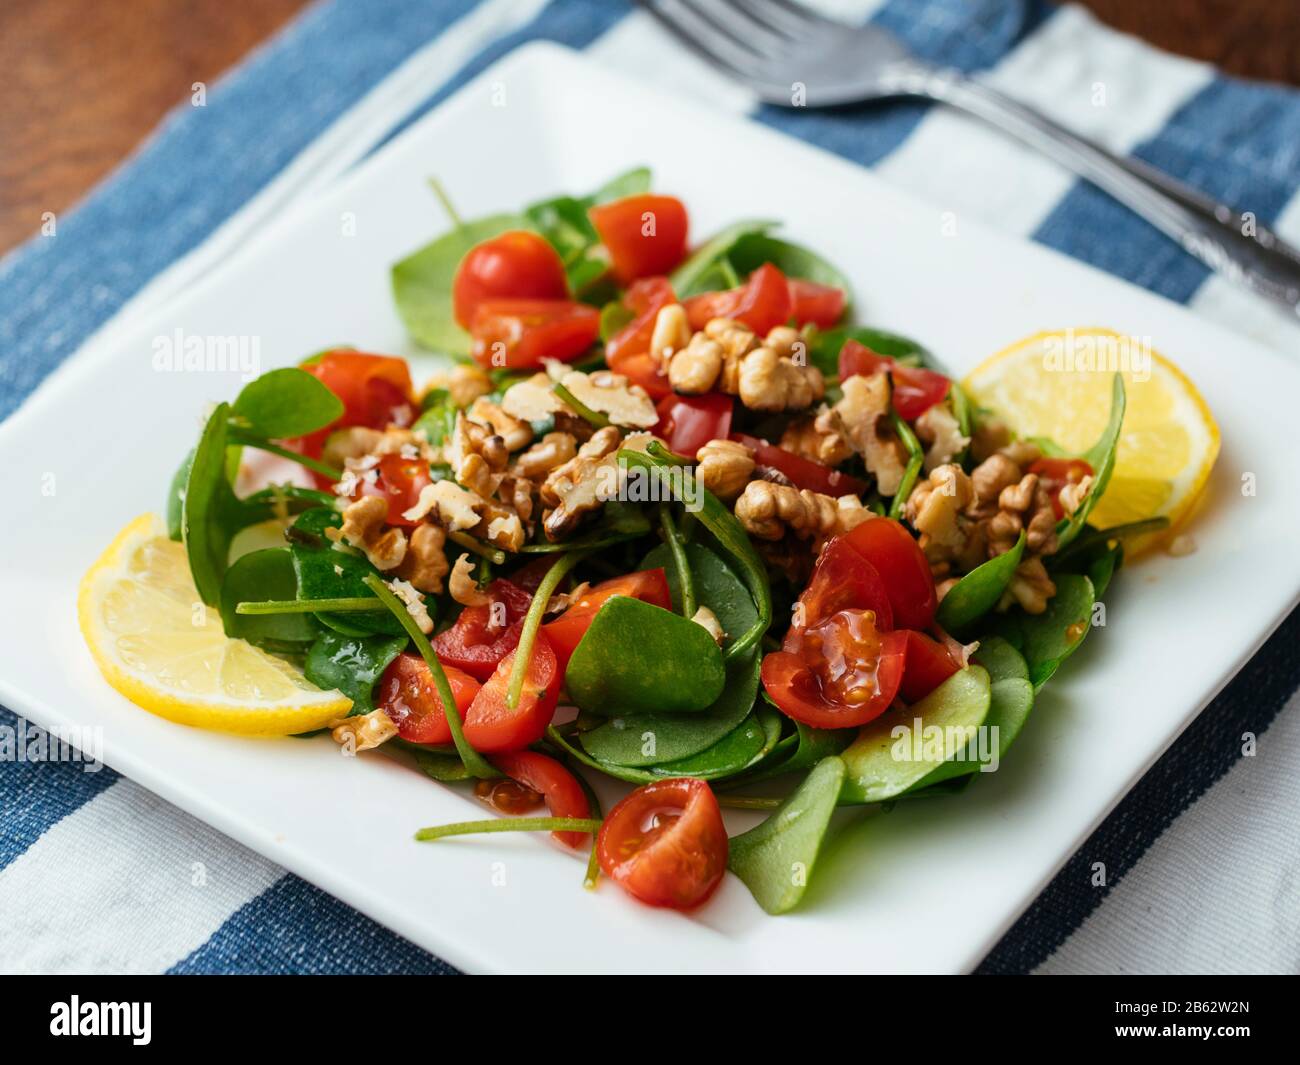 Winter purslane salad with tomatoes and toasted walnuts. Stock Photo